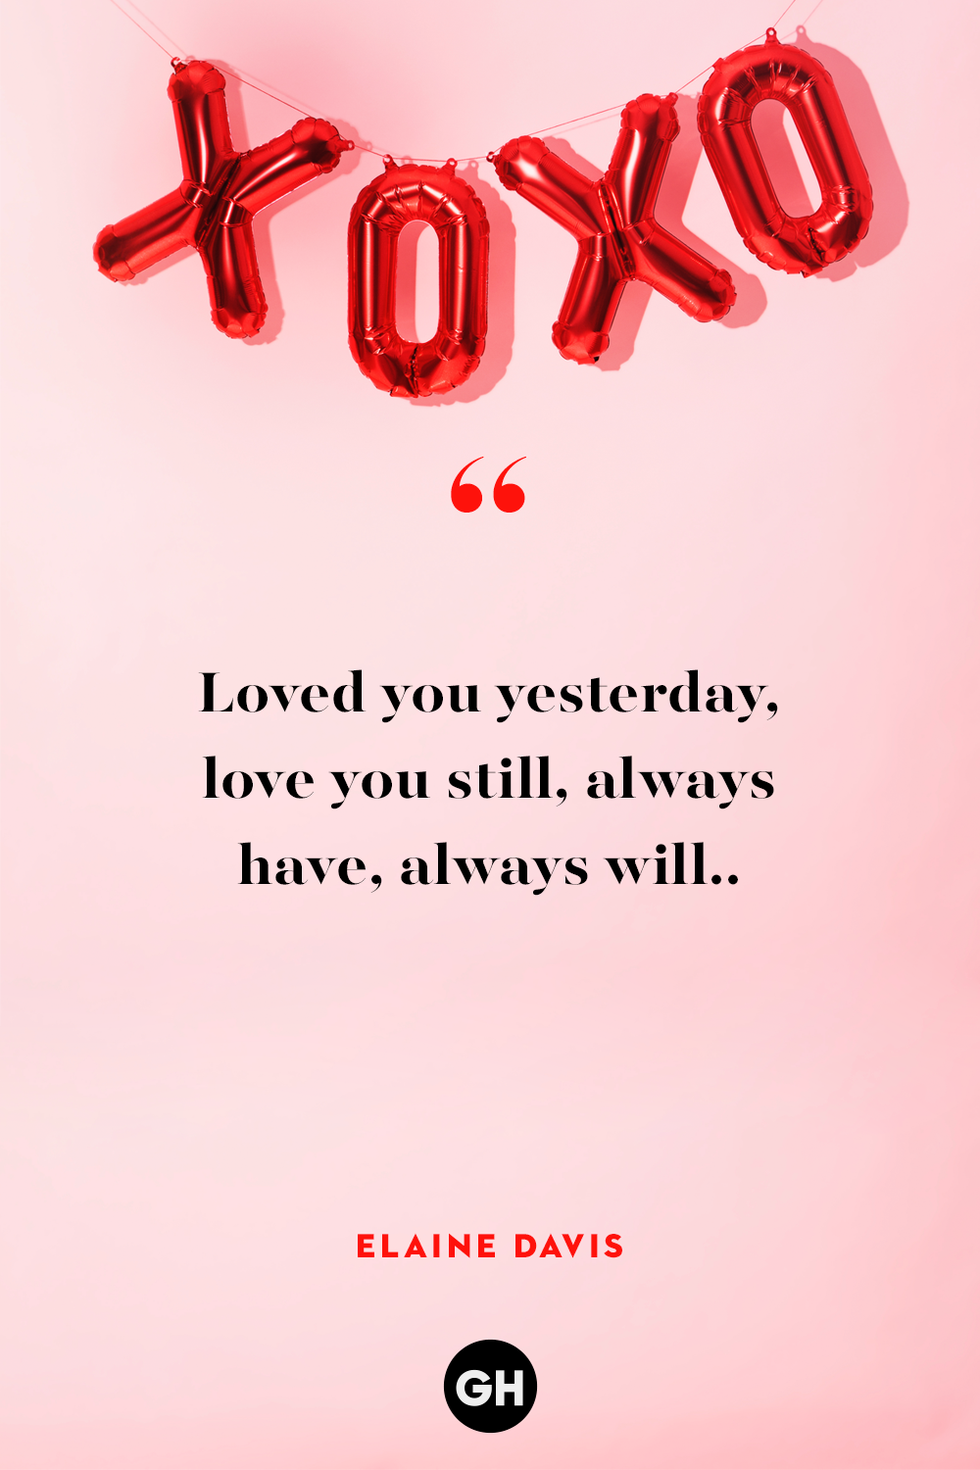 92 Best Valentine's Day Quotes and Romantic Sayings - PureWow